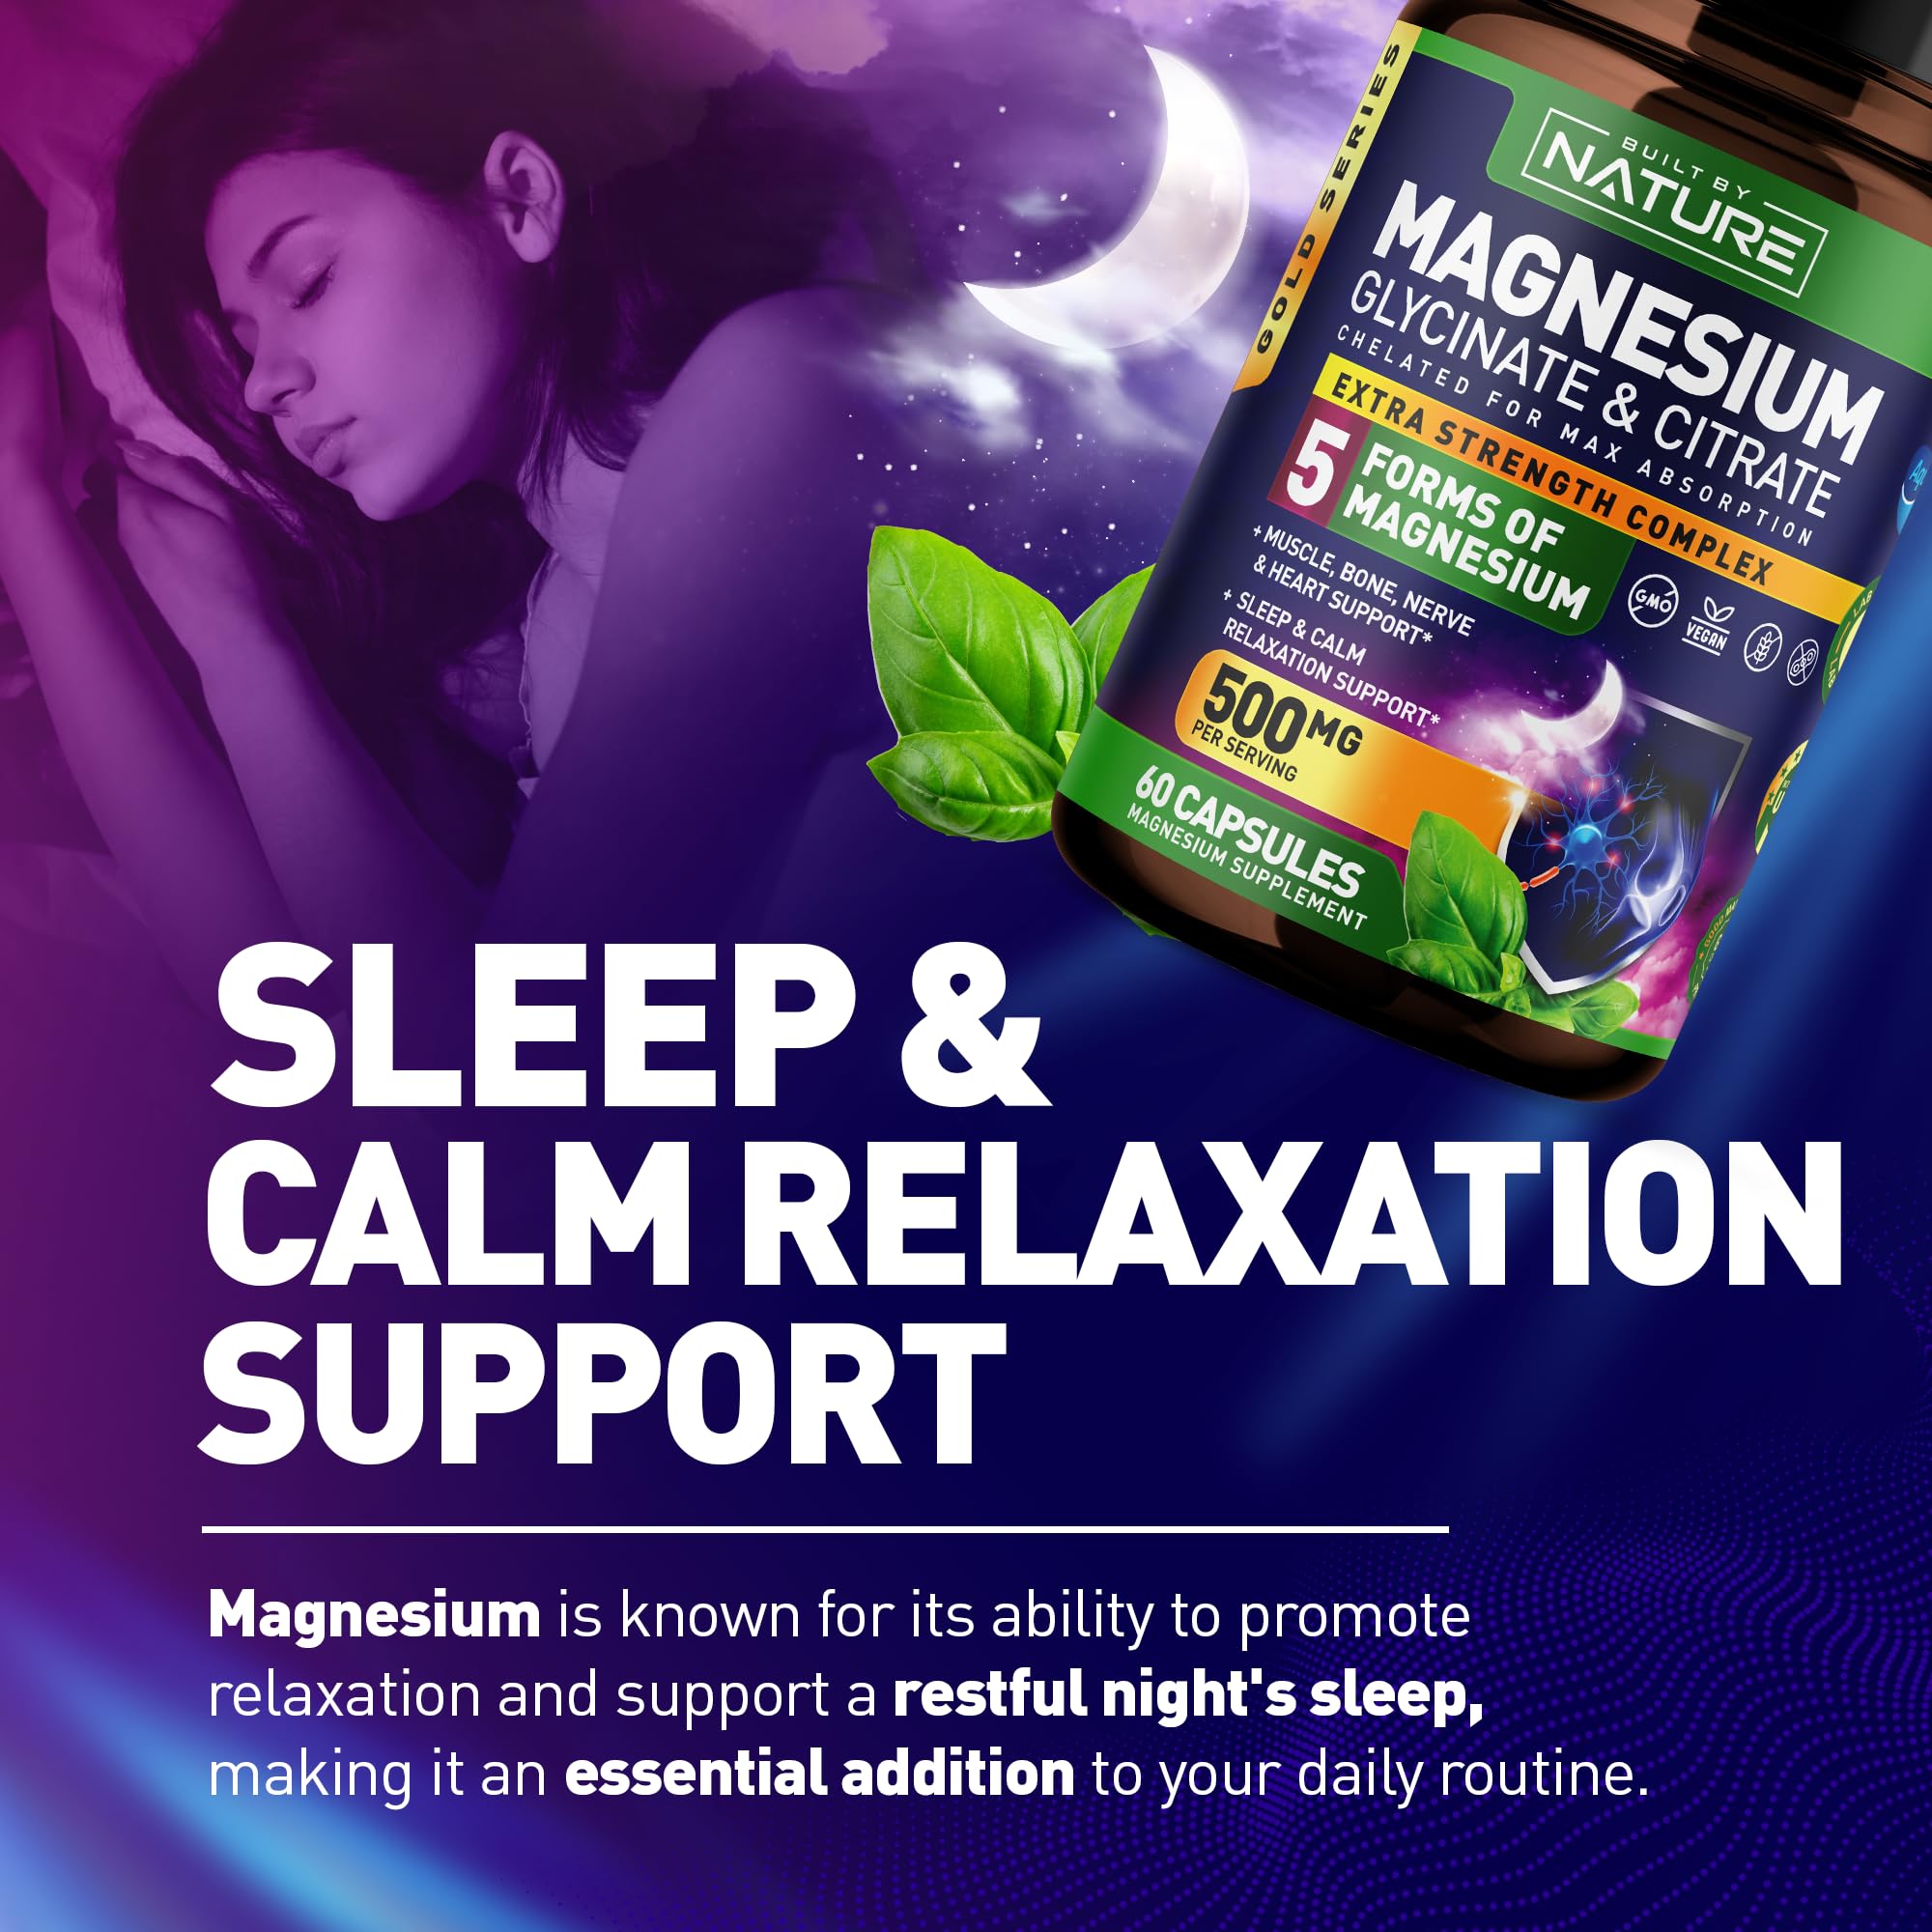 Magnesium Complex 500mg - 5 Forms of Magnesium Glycinate, Citrate, Malate, Oxide & Aquamin with 72 Trace Minerals - Chelated for Absorption - Supplement for Muscle, Nerve, Heart & Sleep